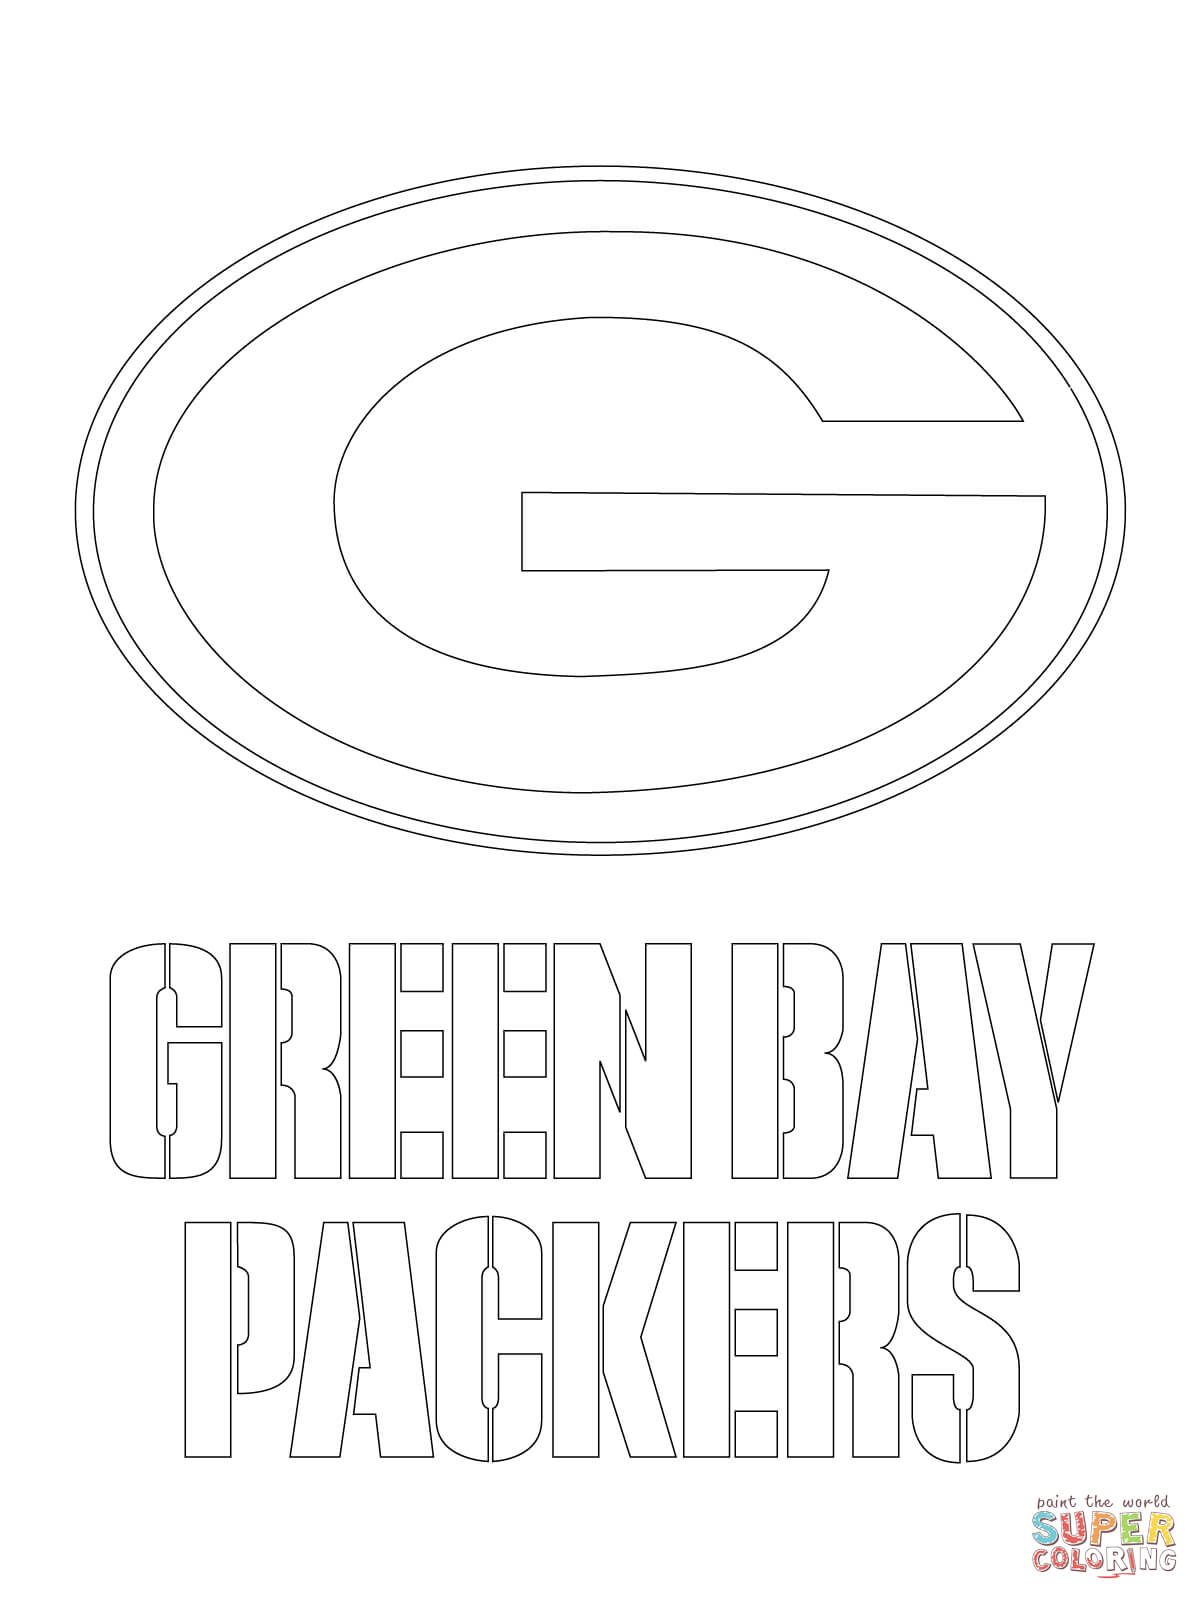 NFL Packers Logo - Green Bay Packers Logo coloring page | Free Printable Coloring Pages